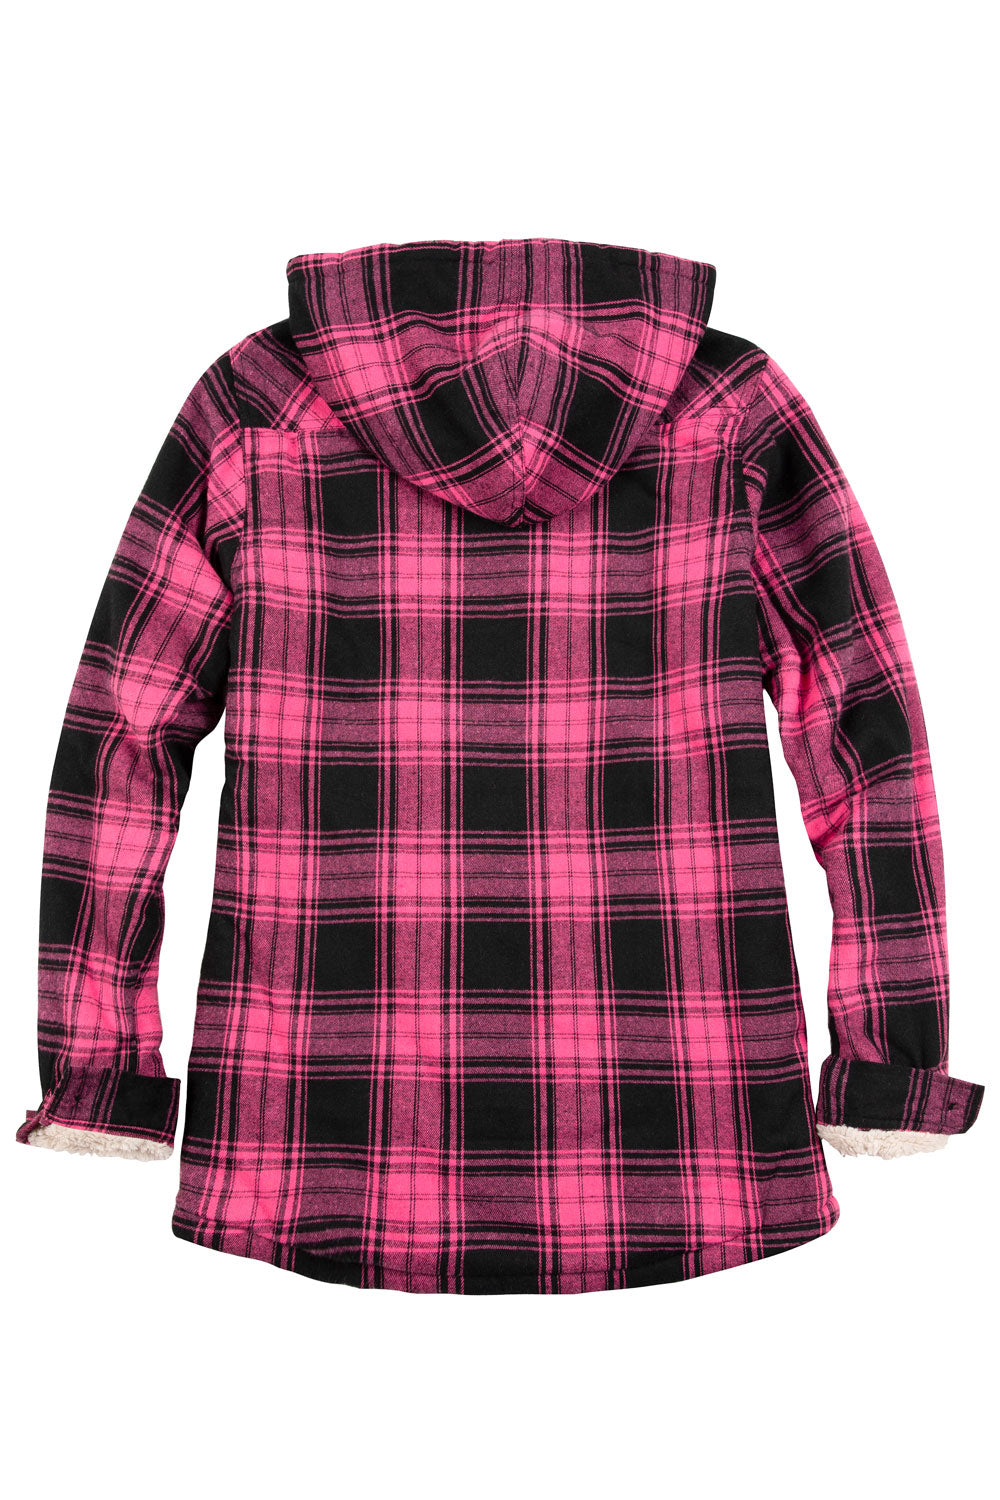 Matching Family Outfits - Women's Pink Flannel Shirt Jacket – FlannelGo